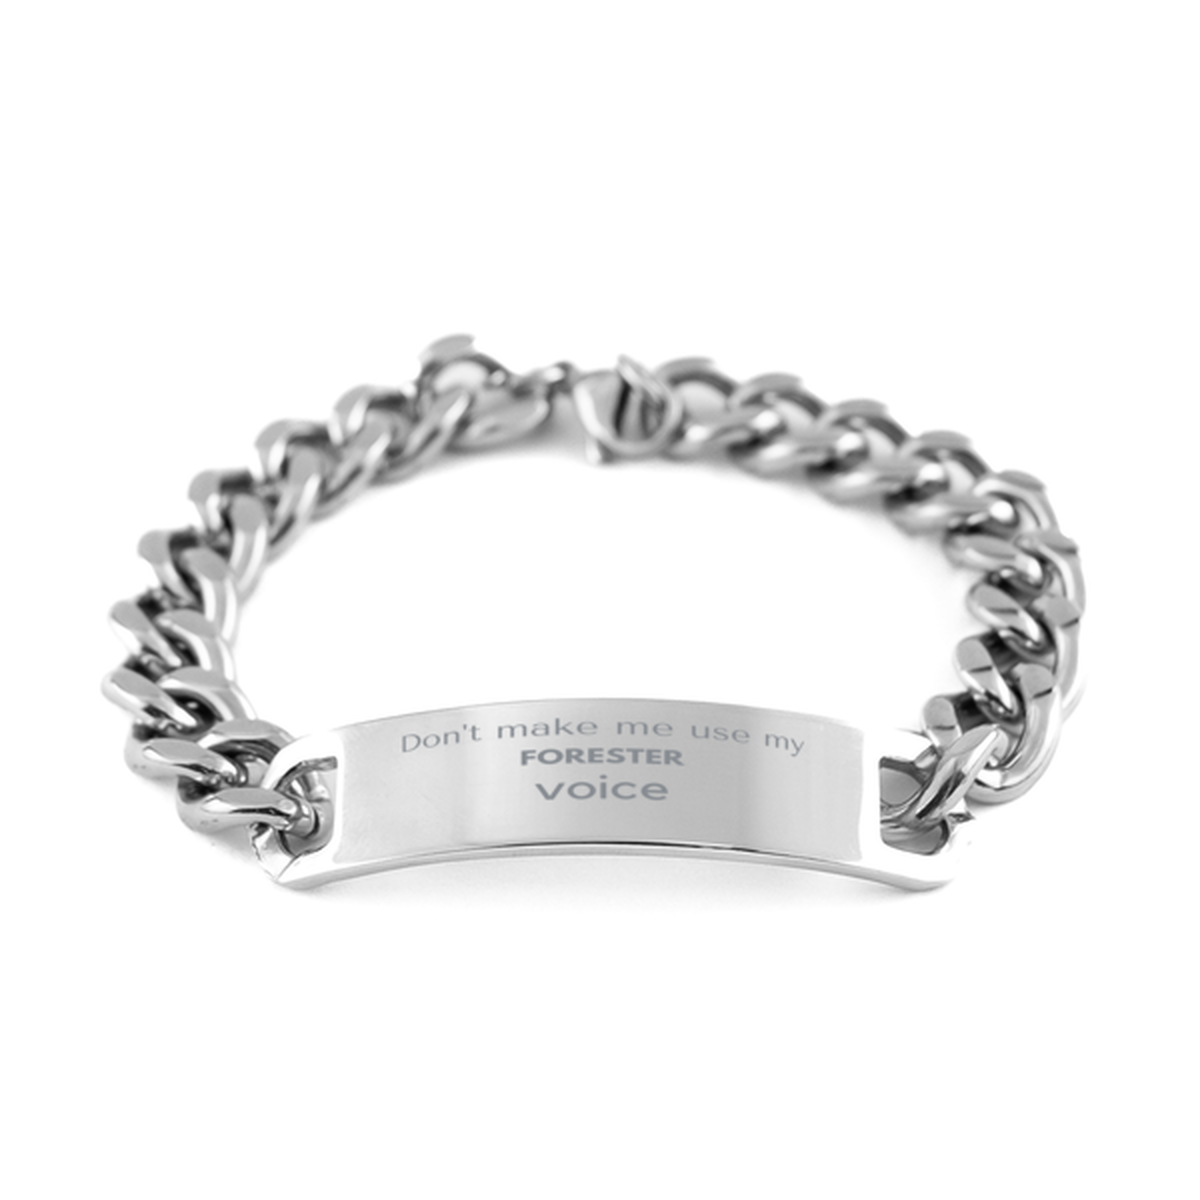 Don't make me use my Forester voice, Sarcasm Forester Gifts, Christmas Forester Cuban Chain Stainless Steel Bracelet Birthday Unique Gifts For Forester Coworkers, Men, Women, Colleague, Friends